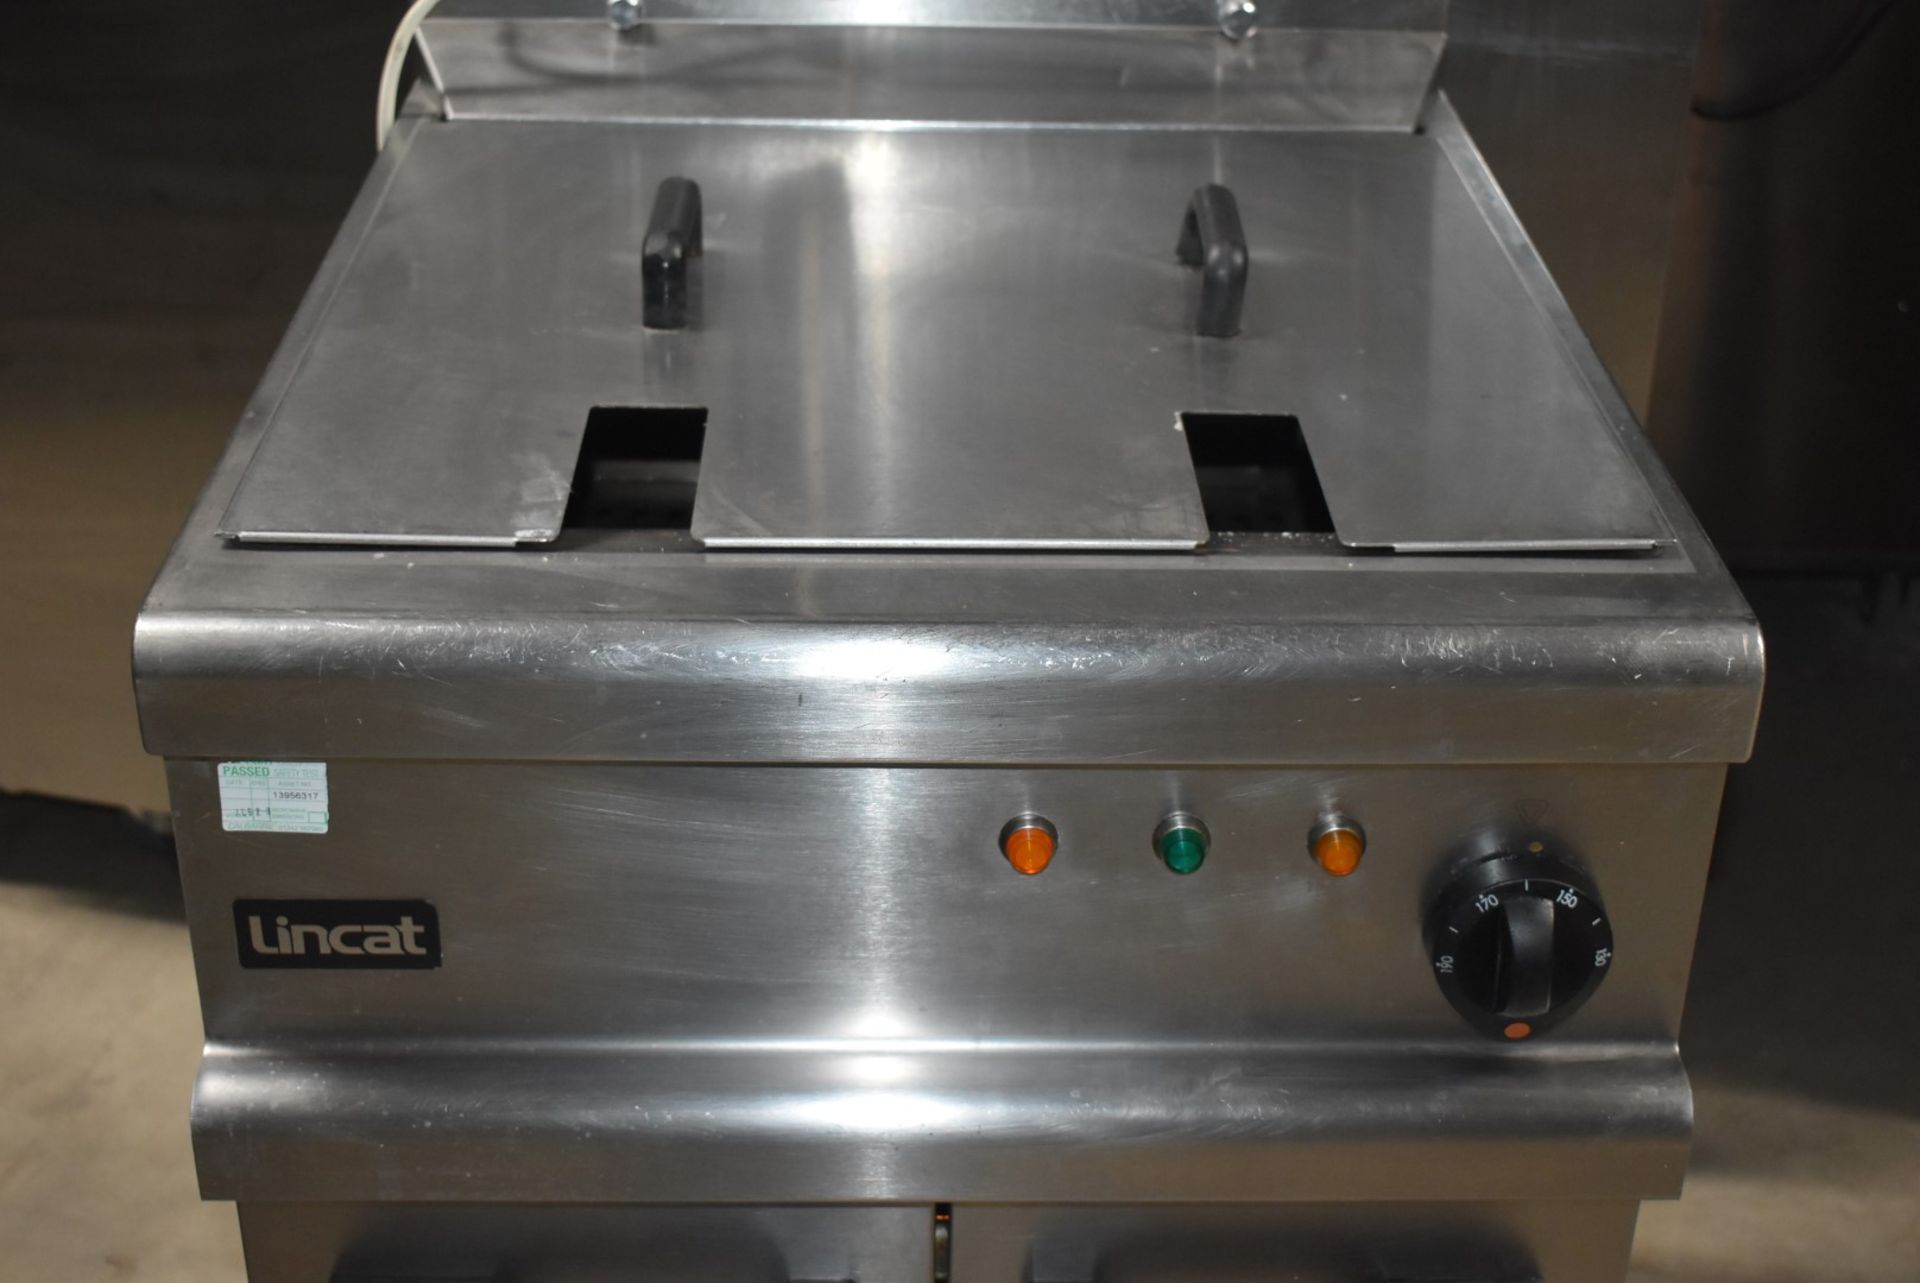 1 x Lincat Opus 700 Single Tank Electric Fryer With Built In Filtration - 3 Phase - Image 11 of 19